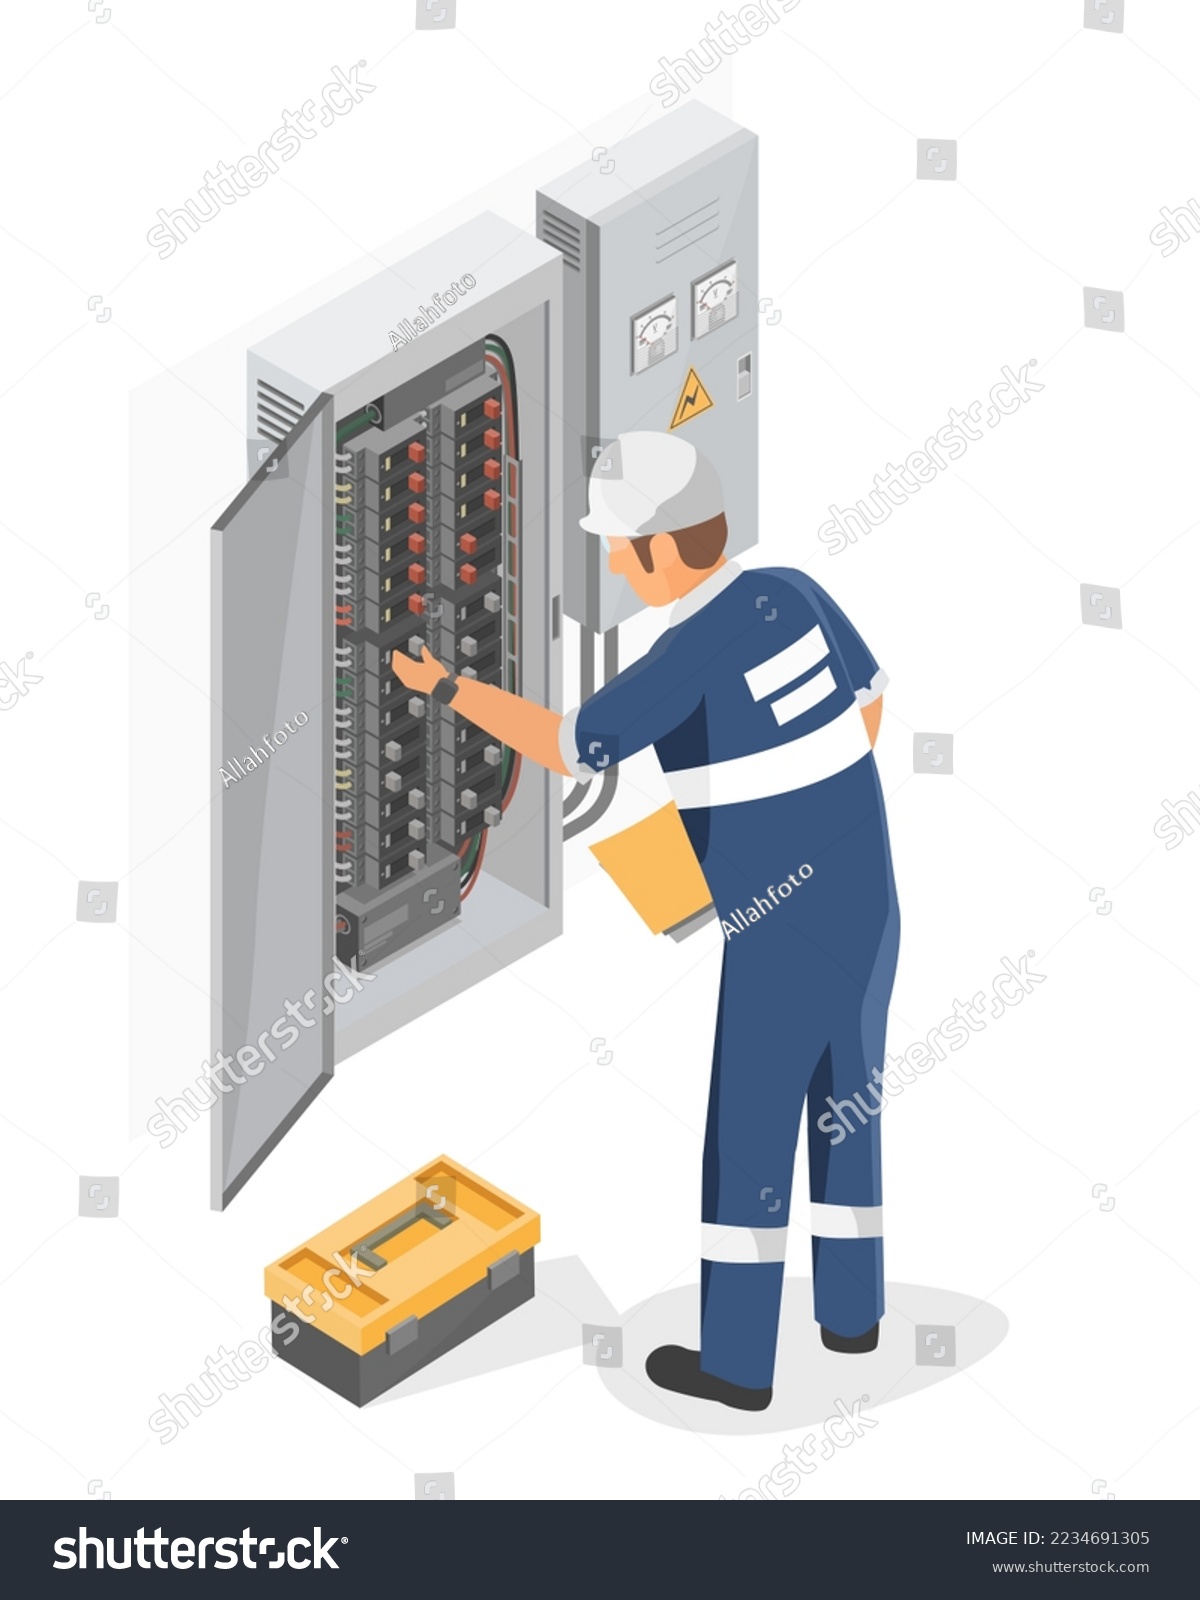 SVG of electricity box power technicians engineering checking service maintenance isometric isolated vector svg